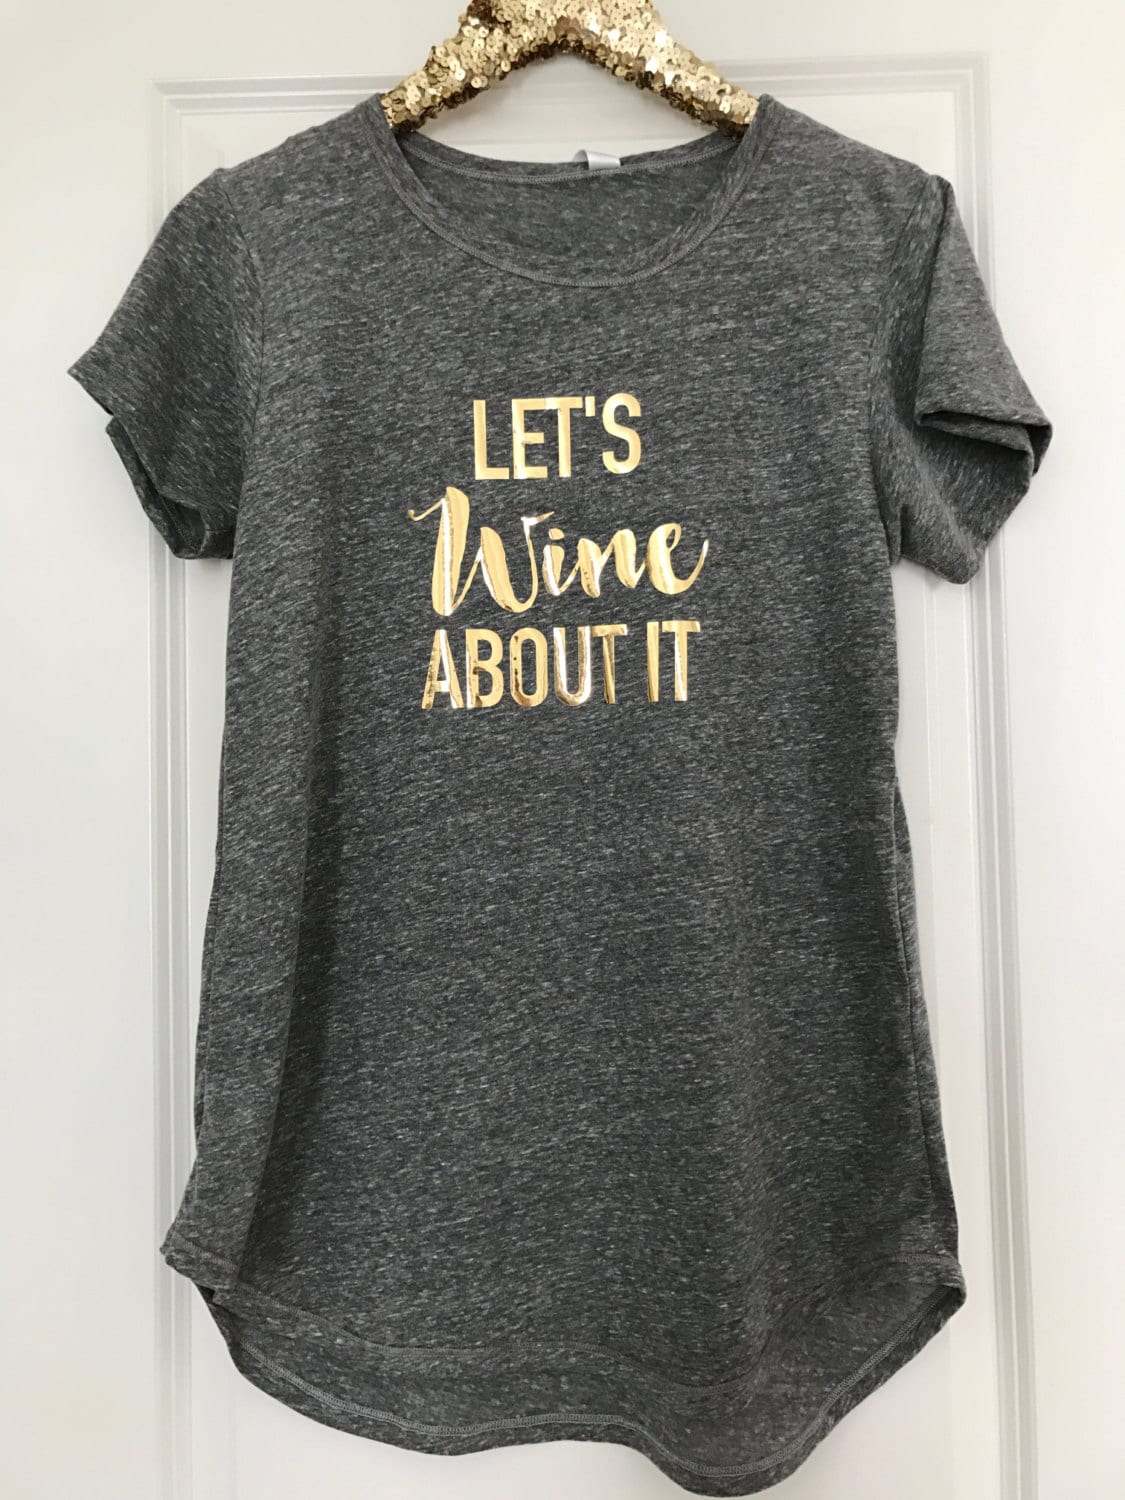 Bridal Party, Wine Lover Phrases Tunic T-shirt Tunic // Bachelorette Party, Bridal Shower, Bride to be, Wedding Gift, Vino, Merlot / 3011